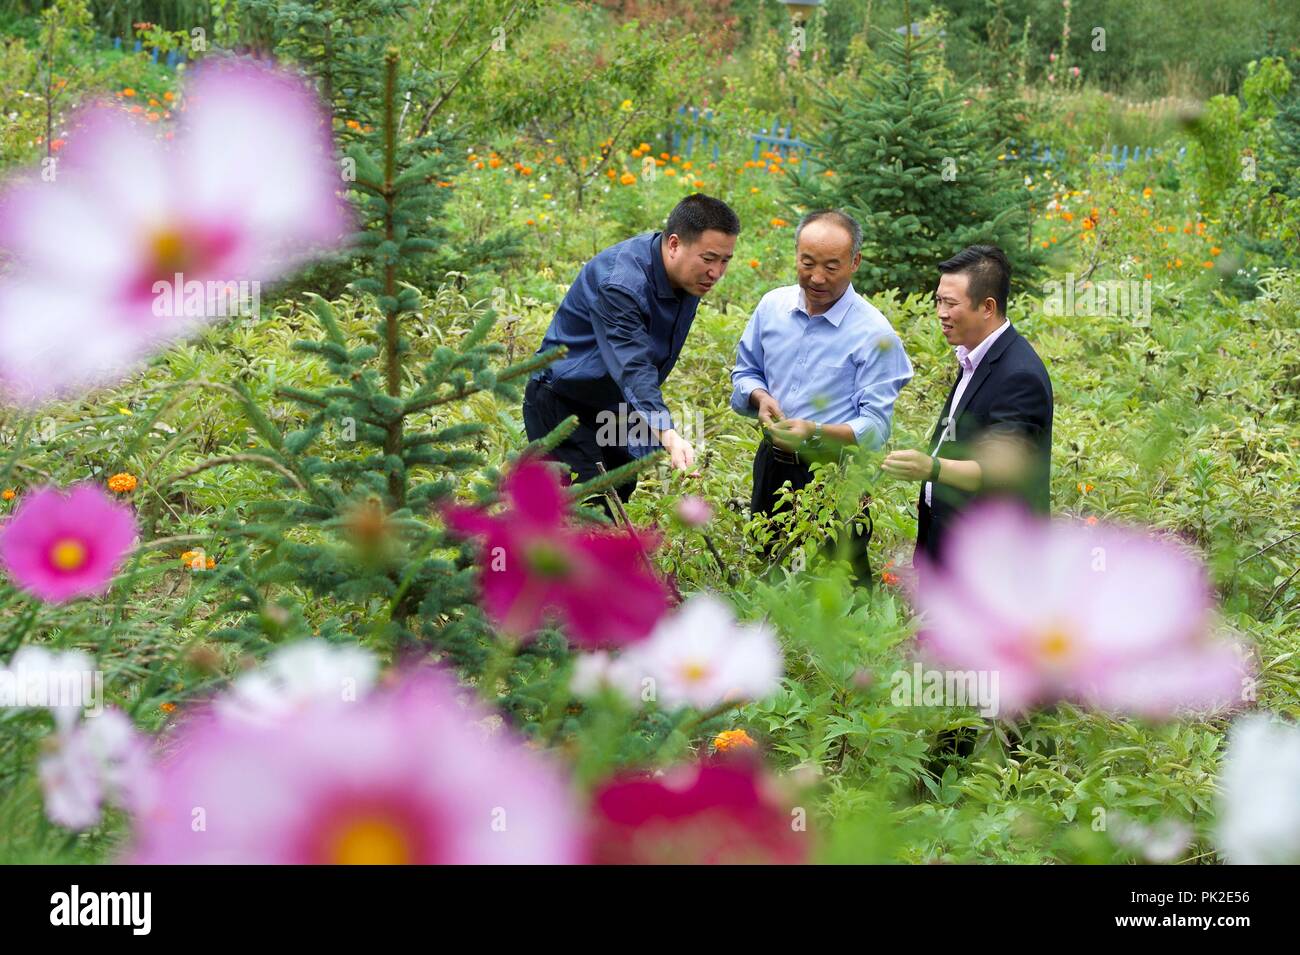 Yinchuan, China's Ningxia Hui Autonomous Region. 30th Aug, 2018. An agricultural teacher instructs farmers in planting peony in Longwangba Village of Xiji County in Guyuan, northwest China's Ningxia Hui Autonomous Region, Aug. 30, 2018. Longwangba is located in Xihaigu, an impoverished mountainous region in Ningxia. In 2011, the village founded a cooperation to develop rural tourism, poultry farming and peony and organic strawberry planting. So far, Longwangba Village has been lifted out of poverty. It sees about 160,000 tourist trips per year. Credit: Jiang Kehong/Xinhua/Alamy Live News Stock Photo